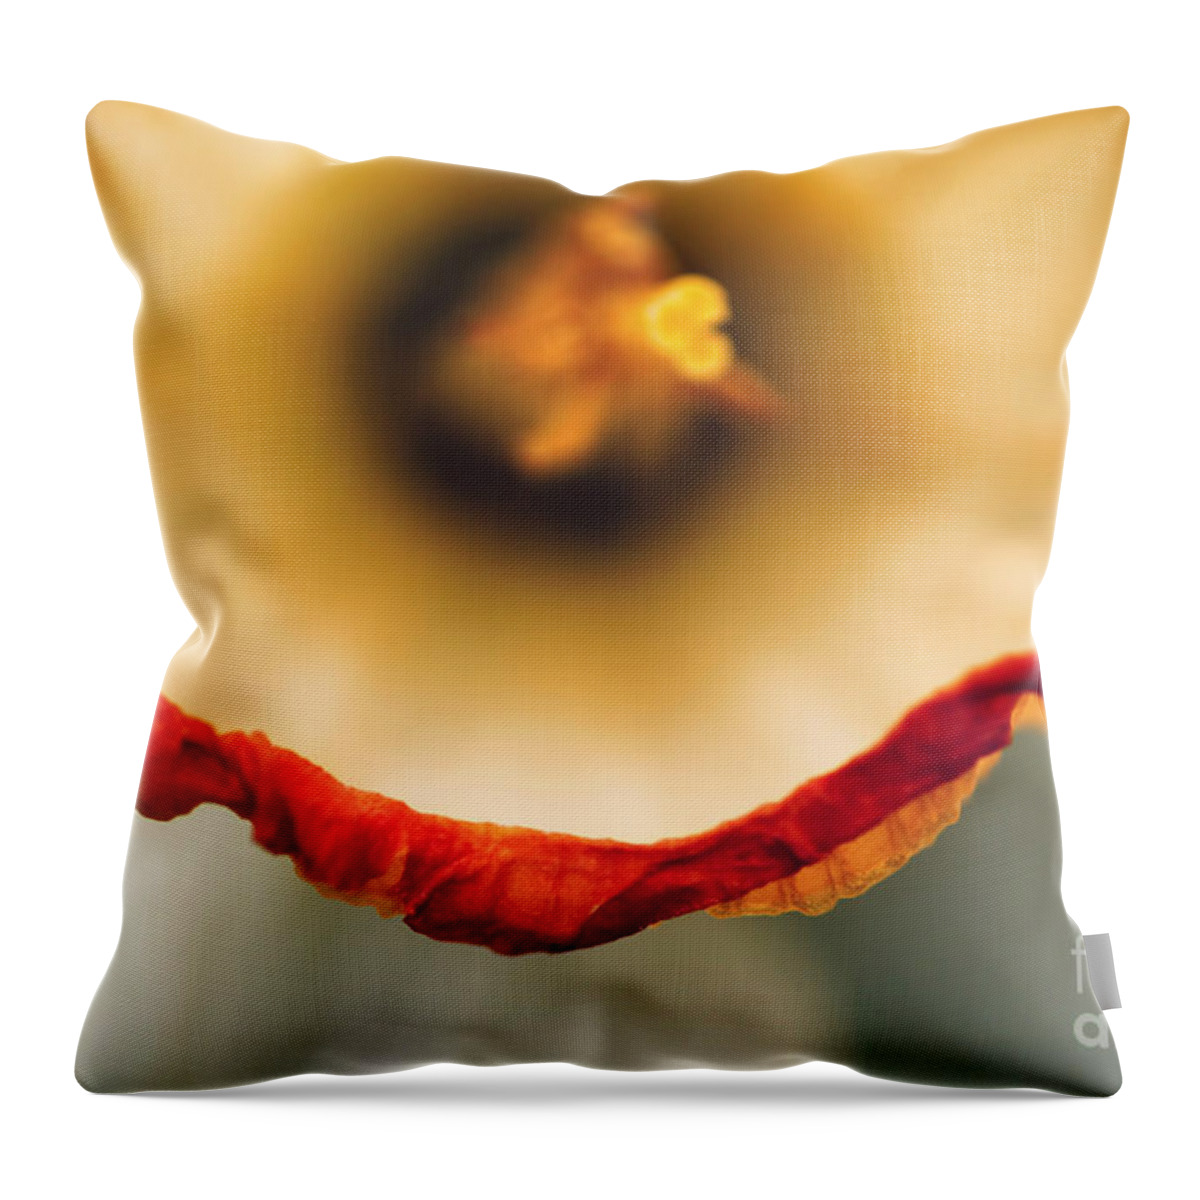 Yellow Throw Pillow featuring the photograph Daffodil Abstract by Darren Fisher